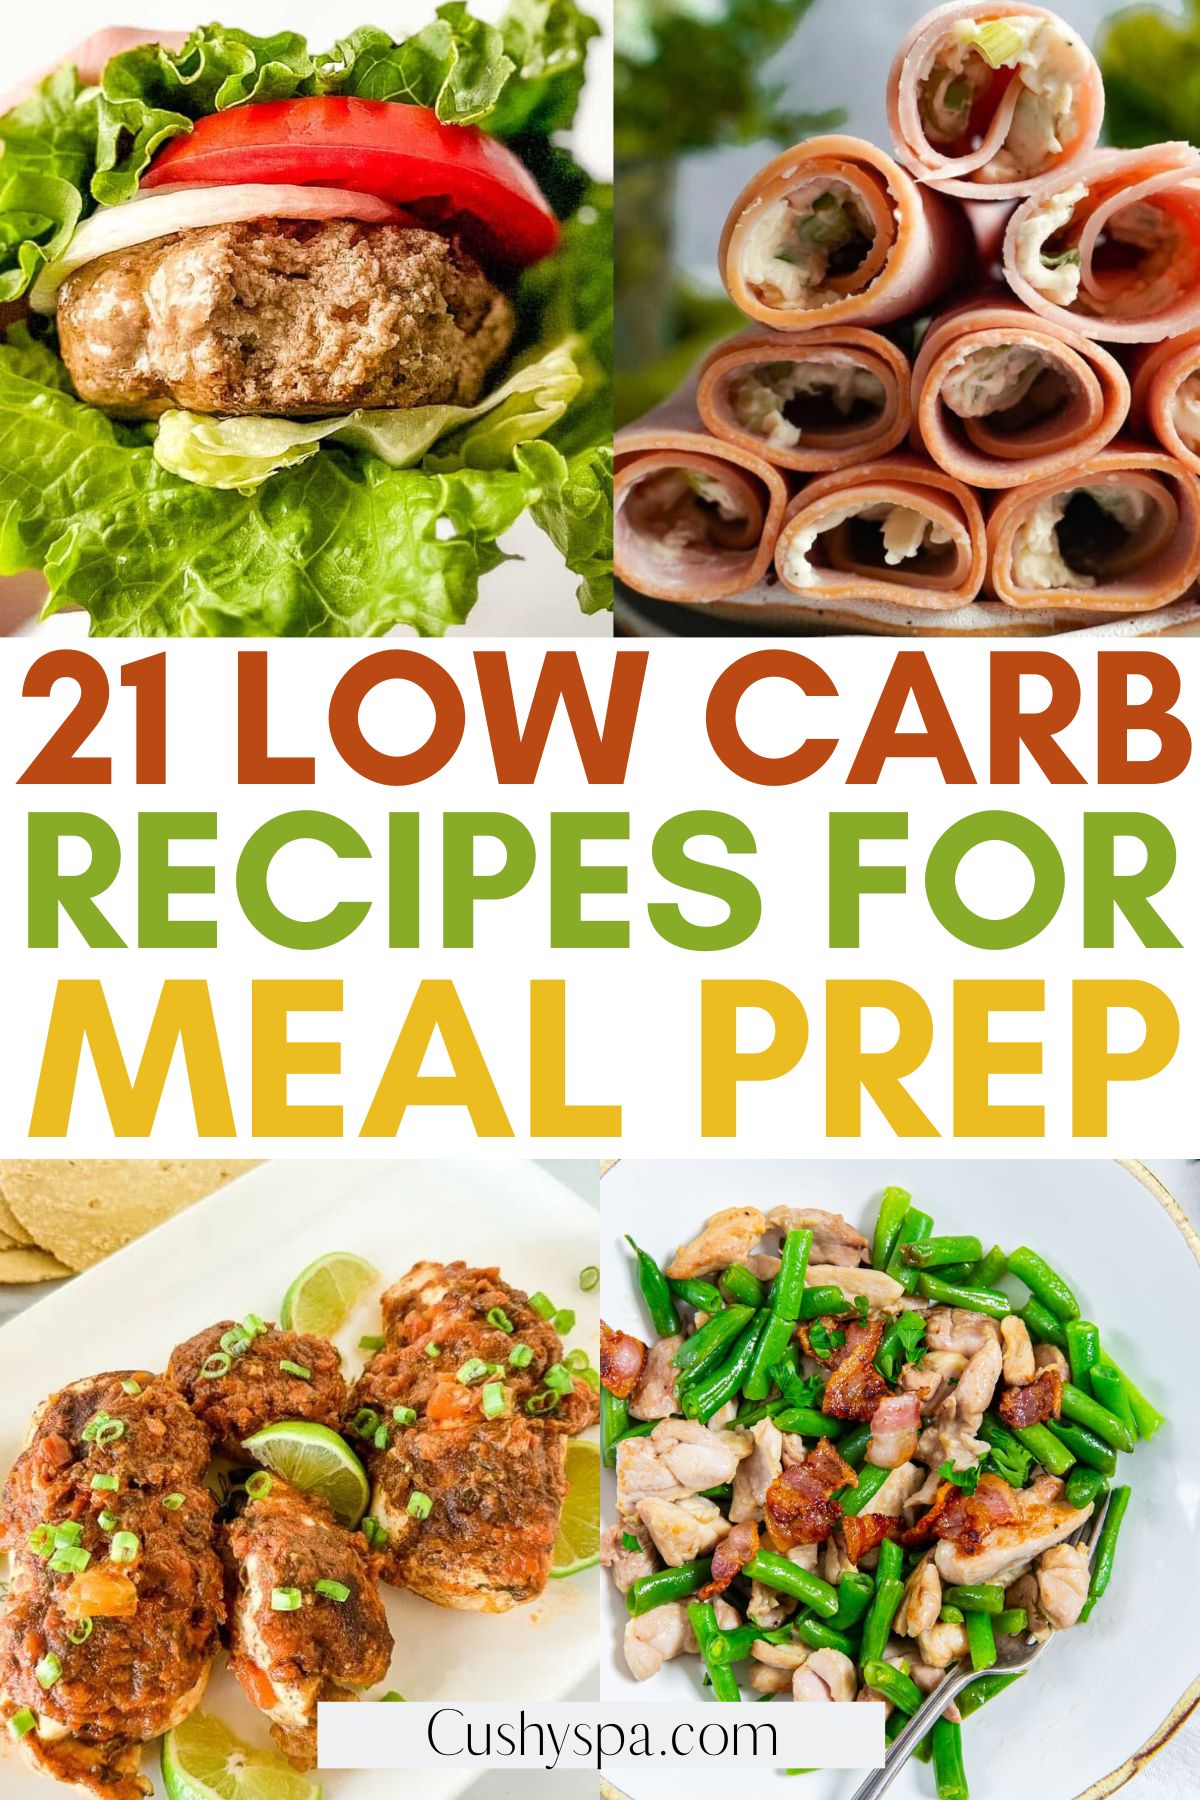 Low Carb Recipes for Meal Prep